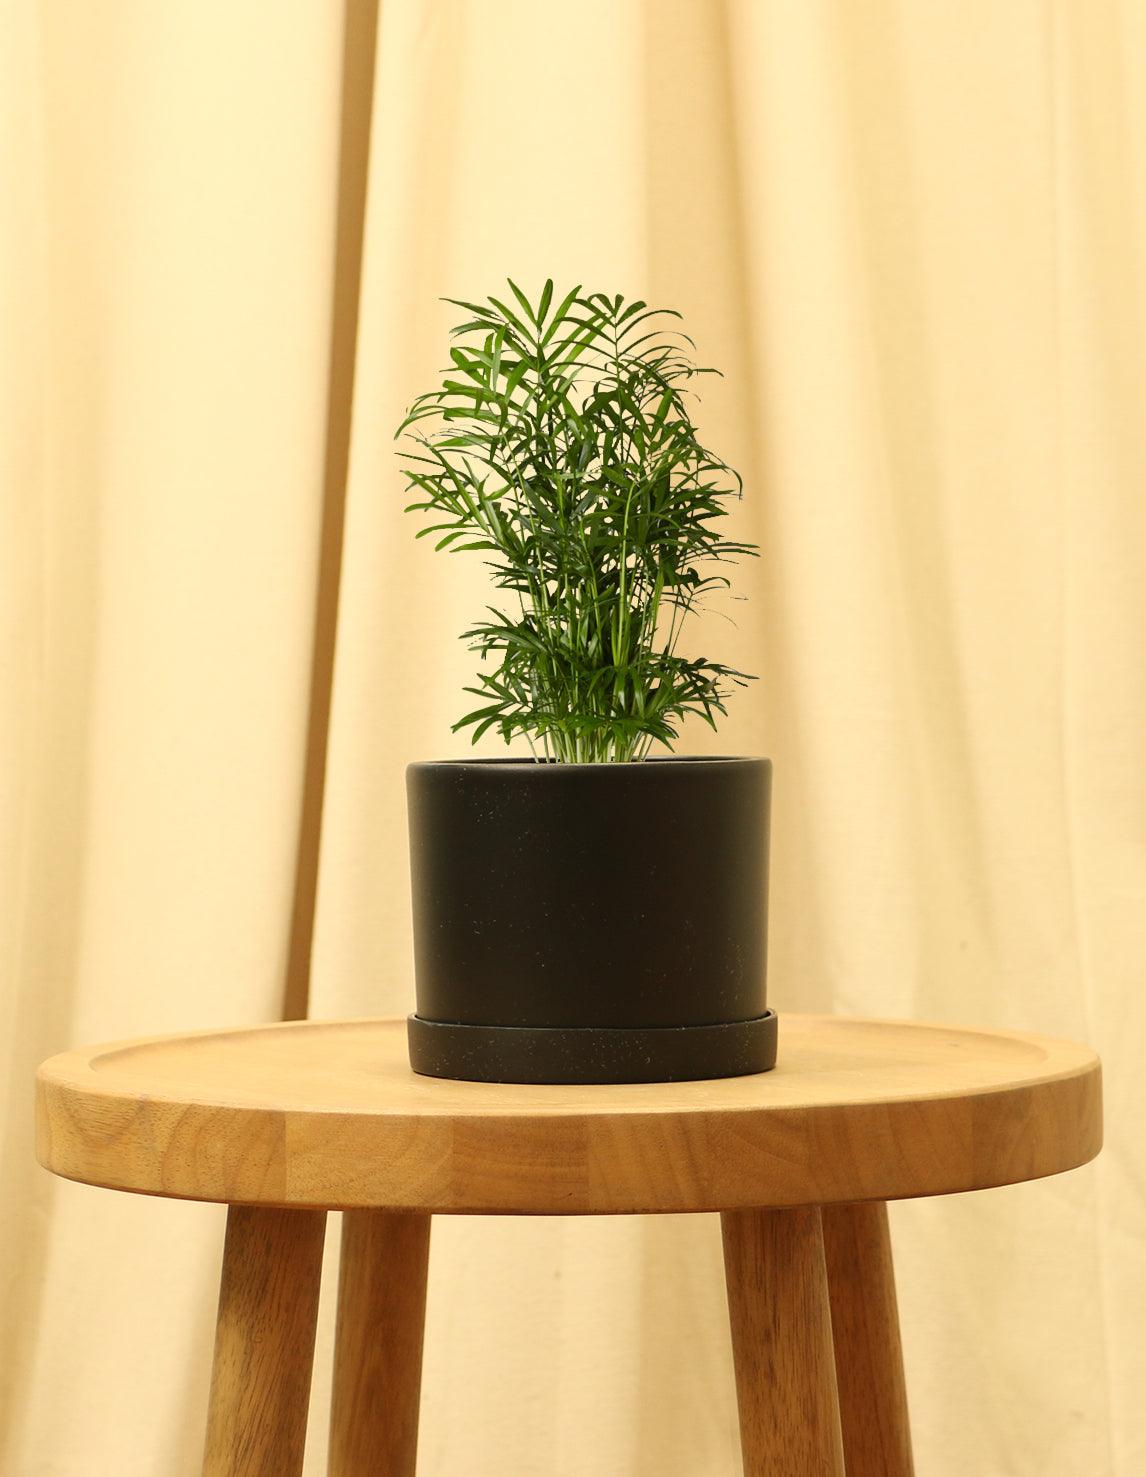 Small Parlor Palm in black pot.